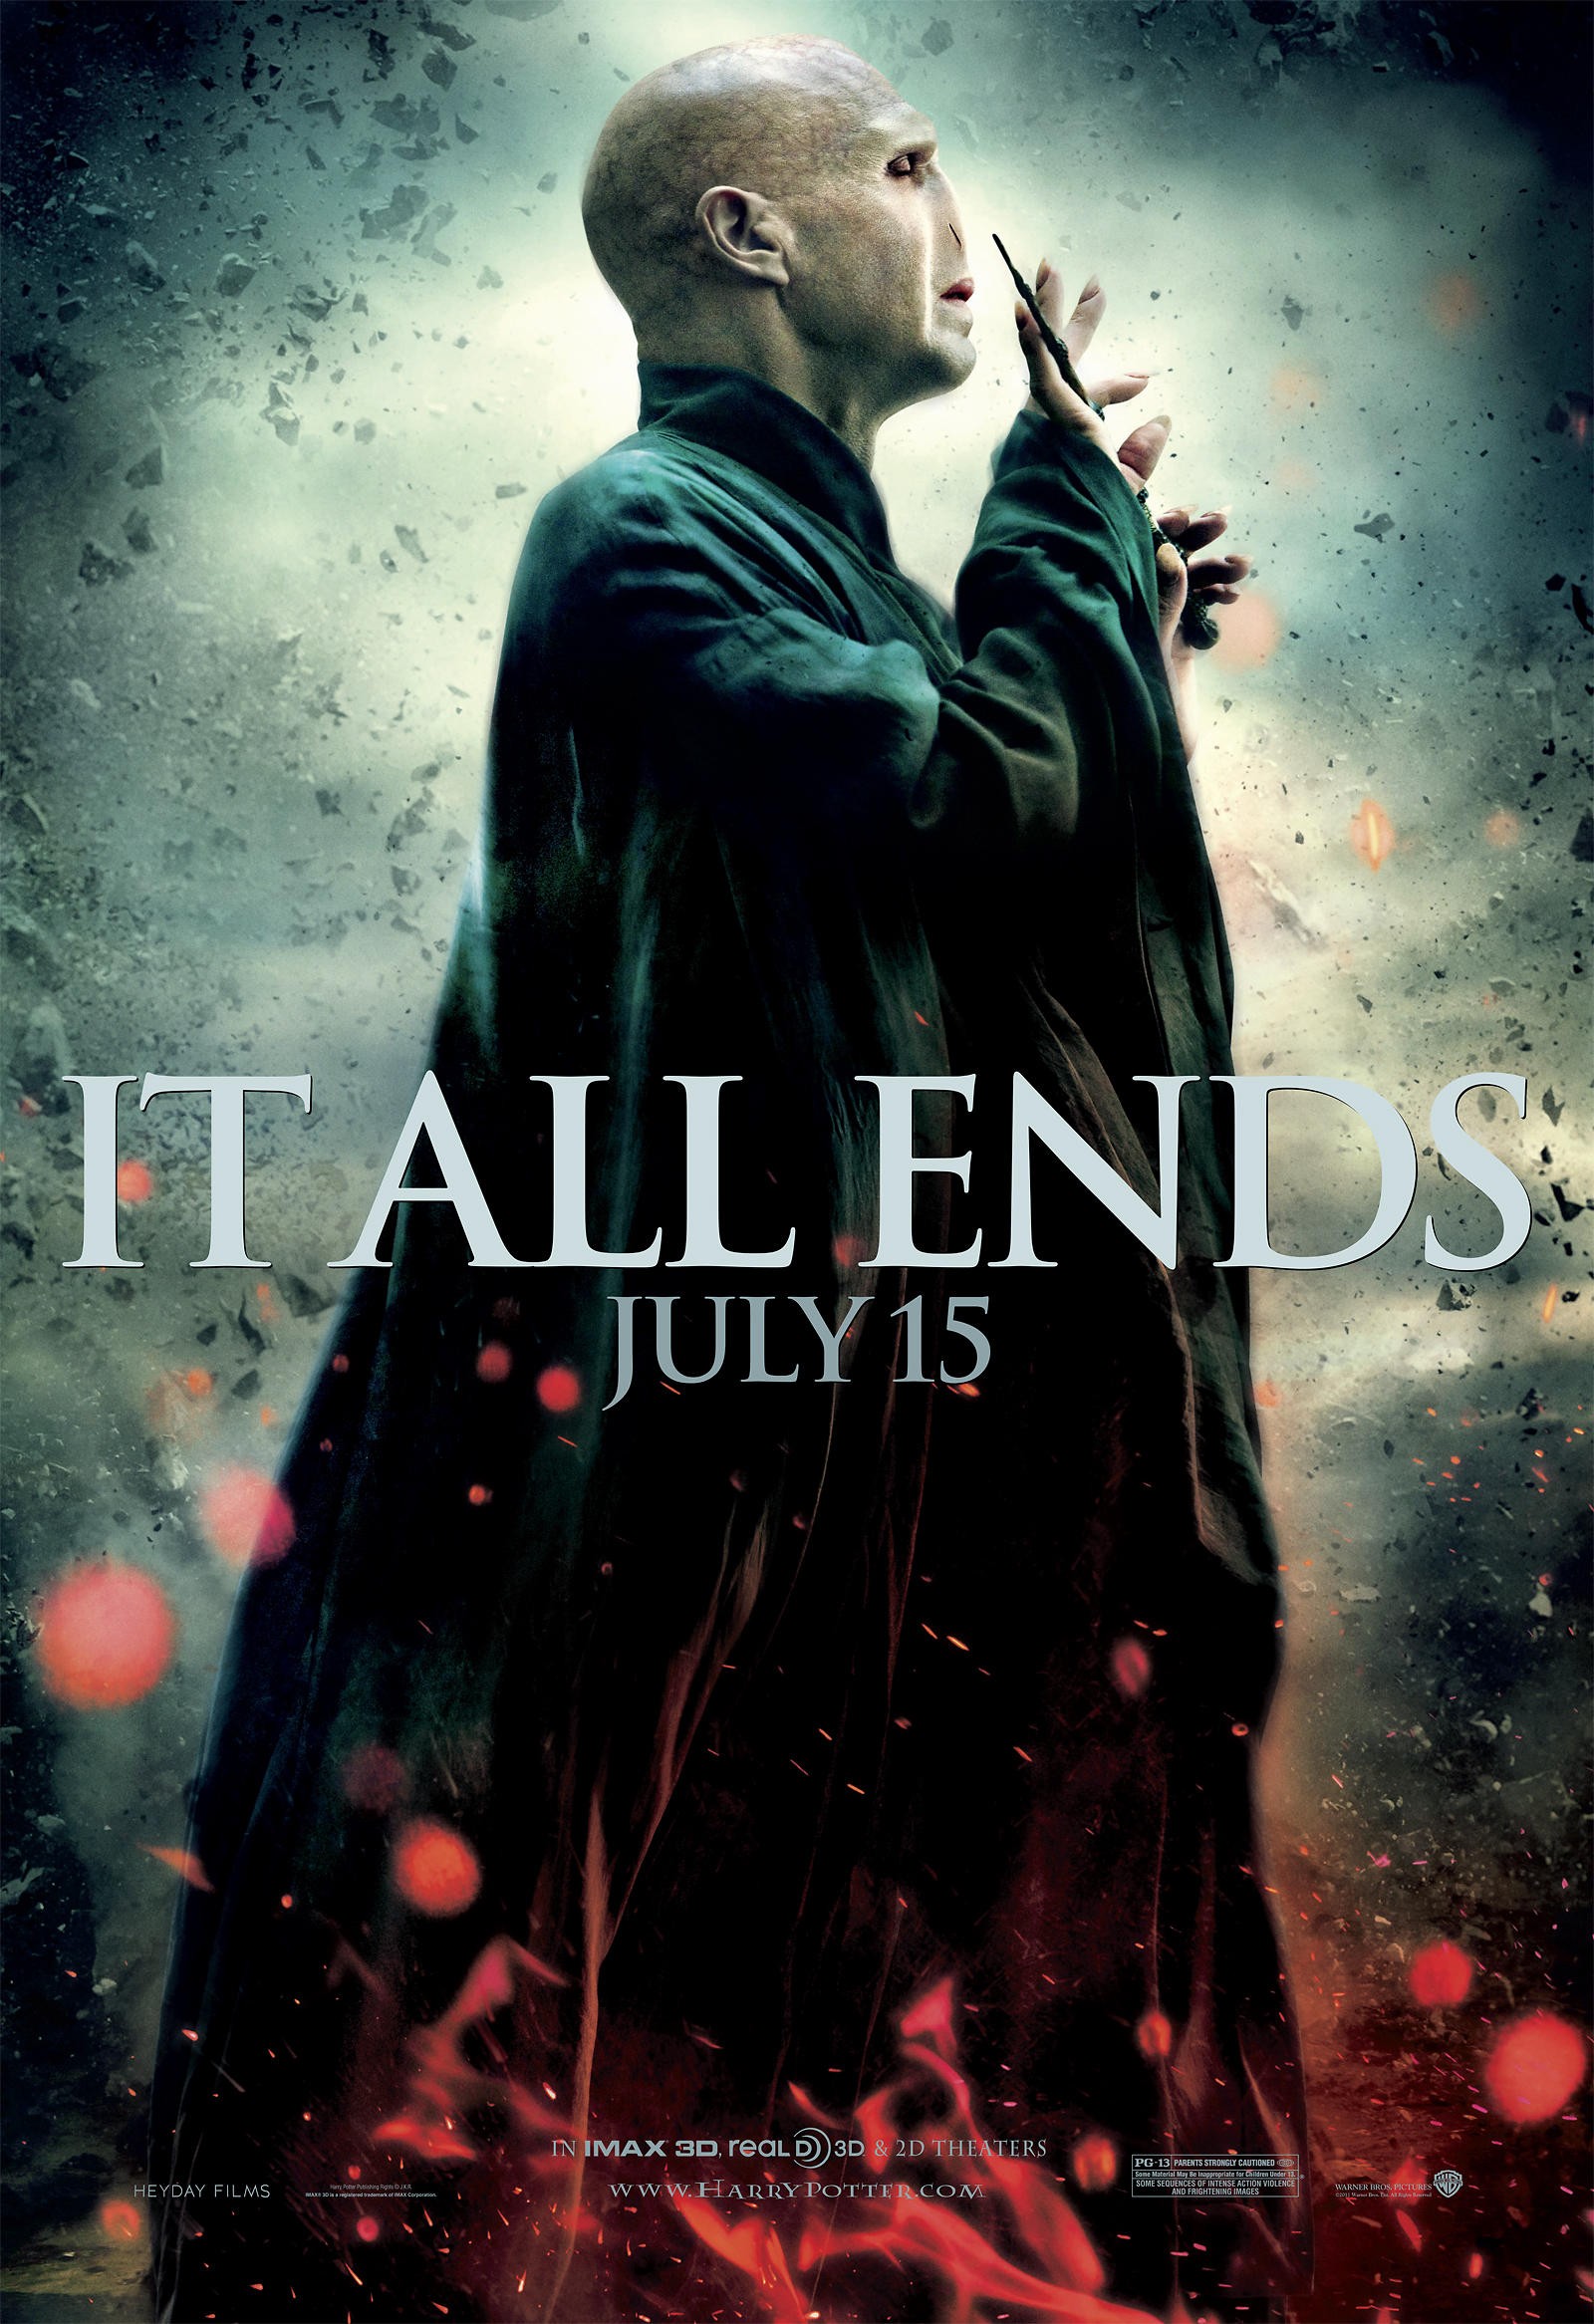 Mega Sized Movie Poster Image for Harry Potter and the Deathly Hallows: Part 2 (#28 of 28)